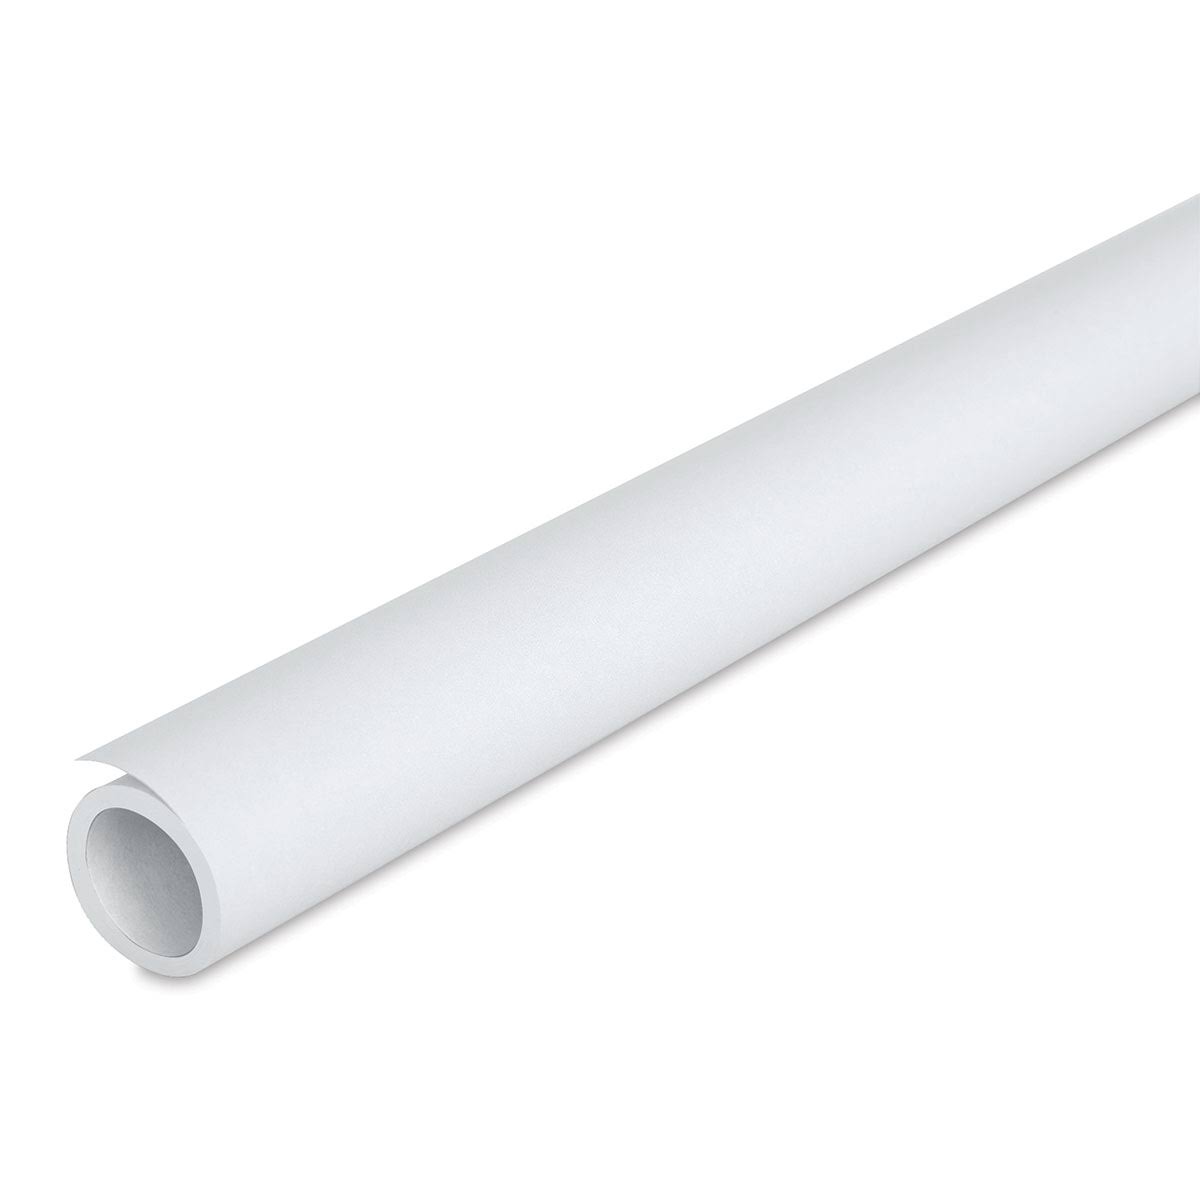 Pacon Fadeless Colored Paper Rolls - White, 24 in. x 12 ft